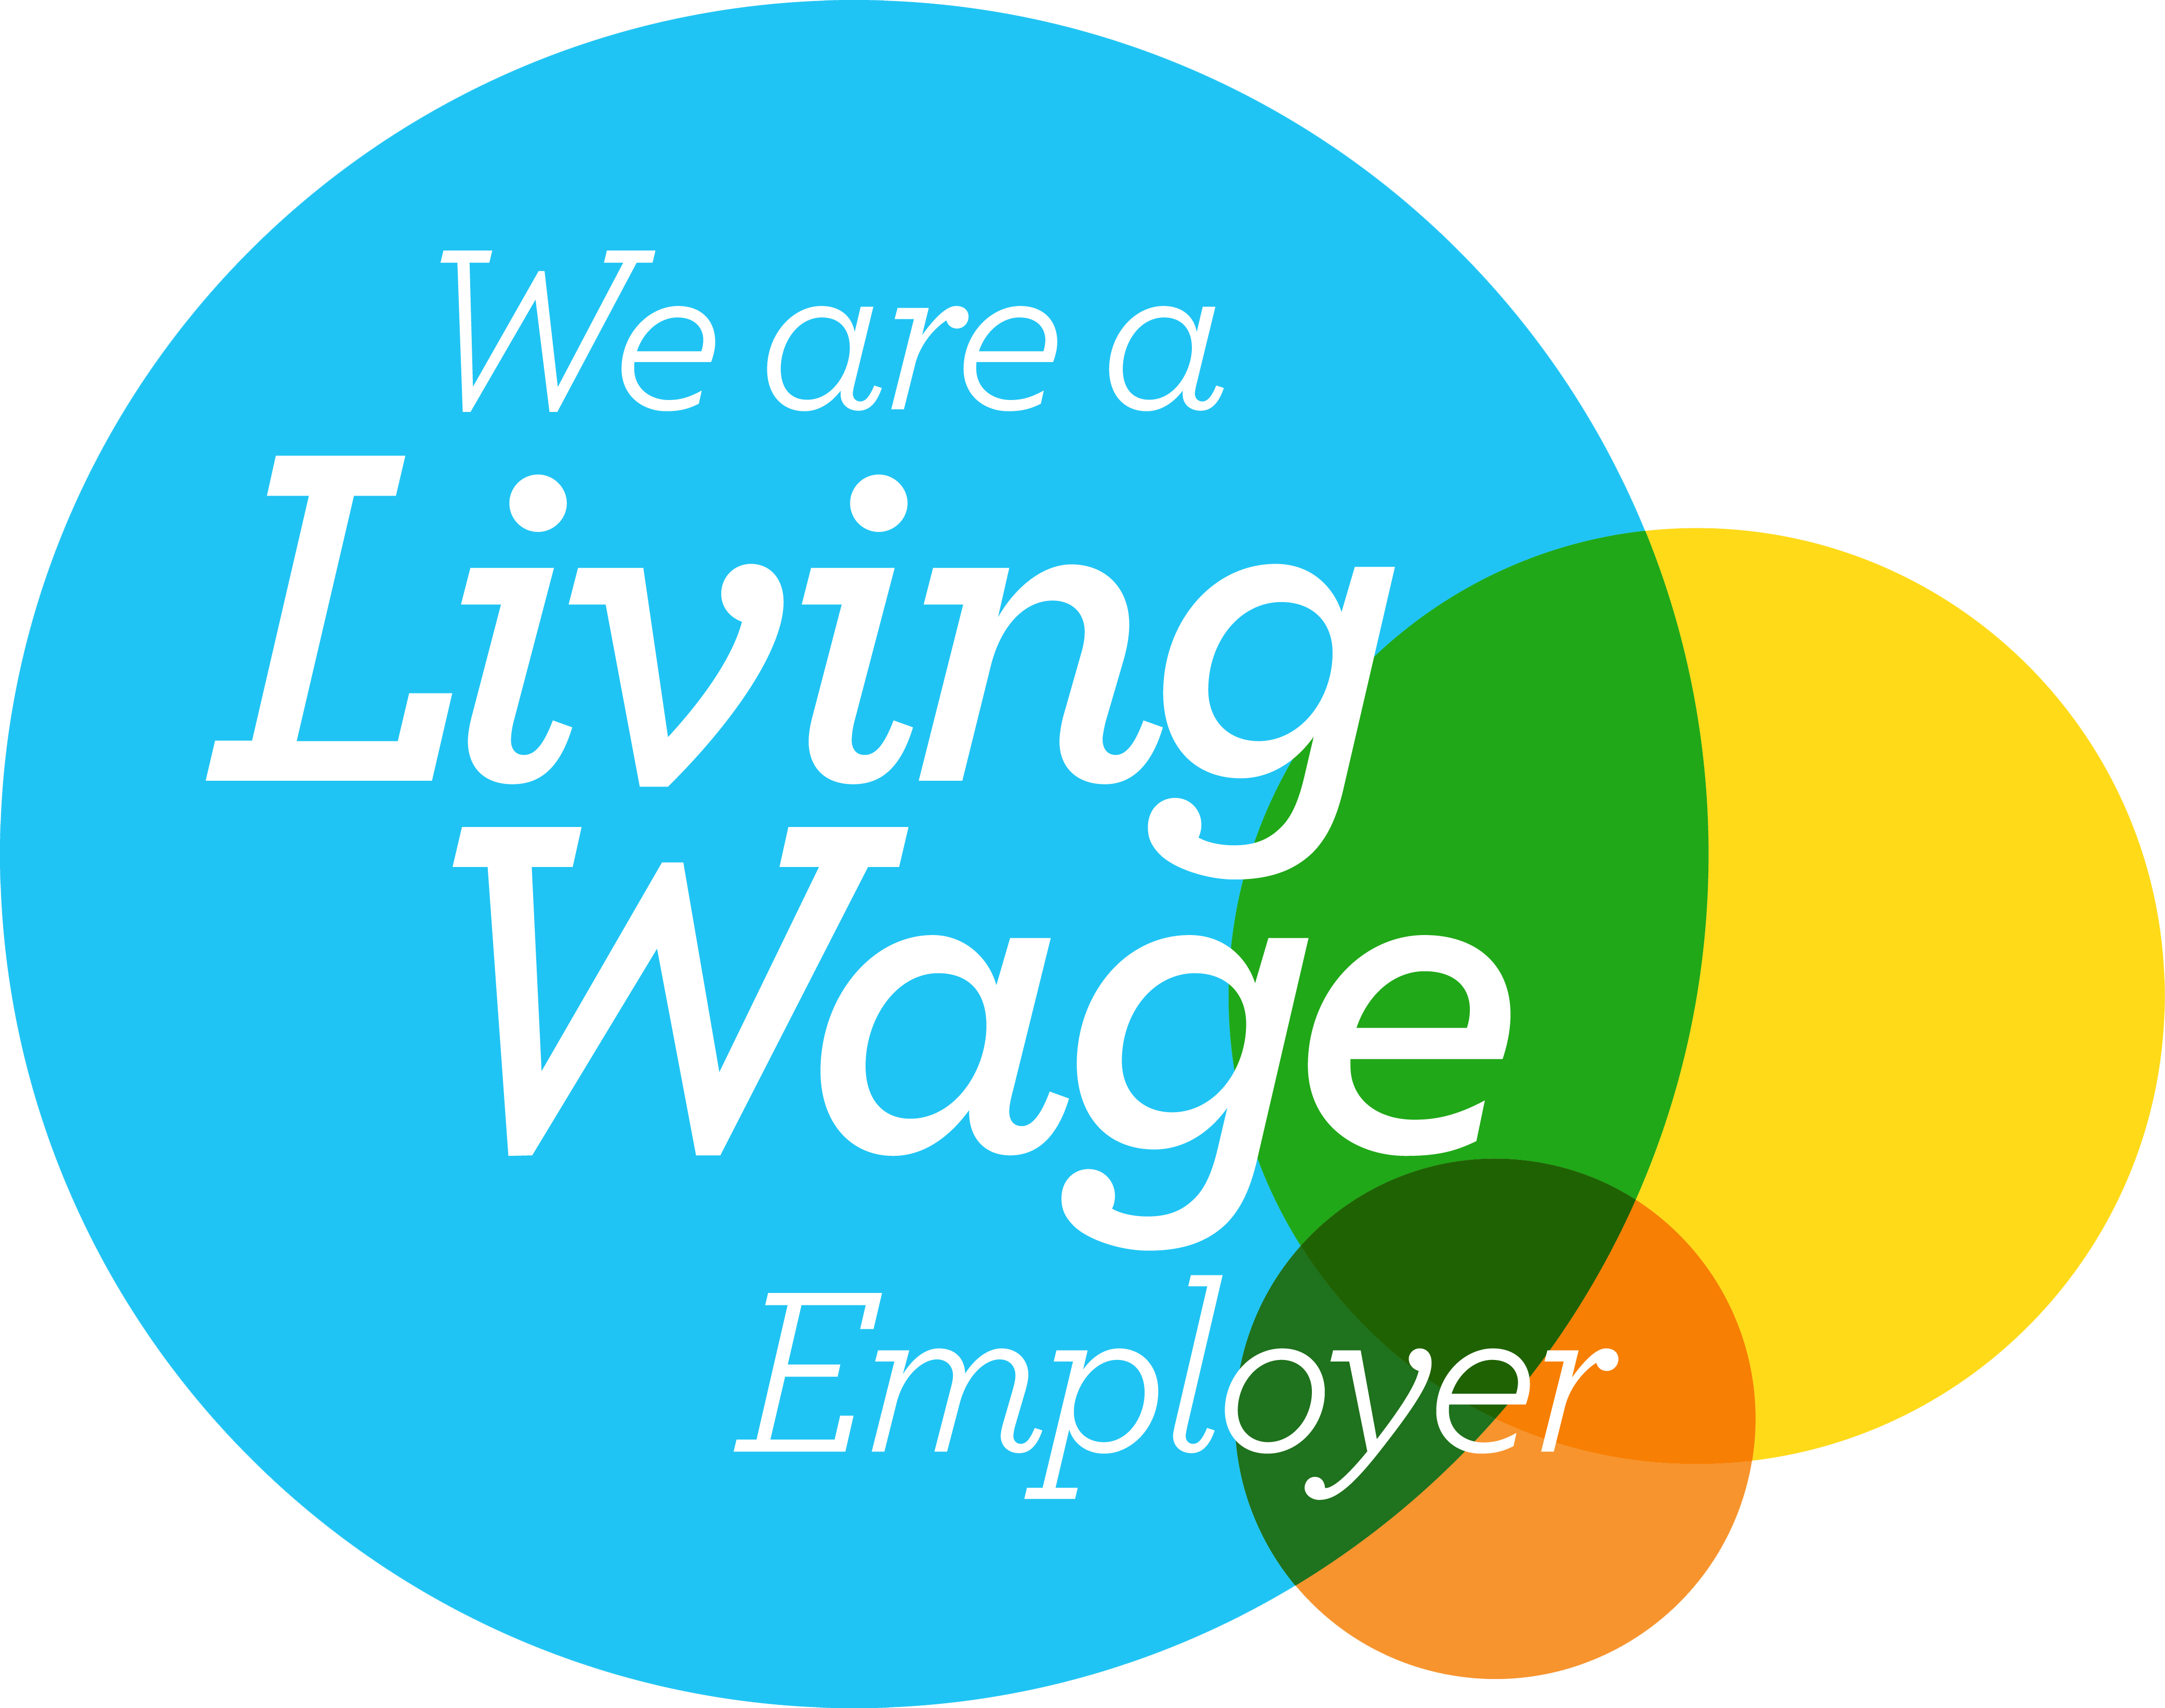 Project Harmless is a Living Wage Employer